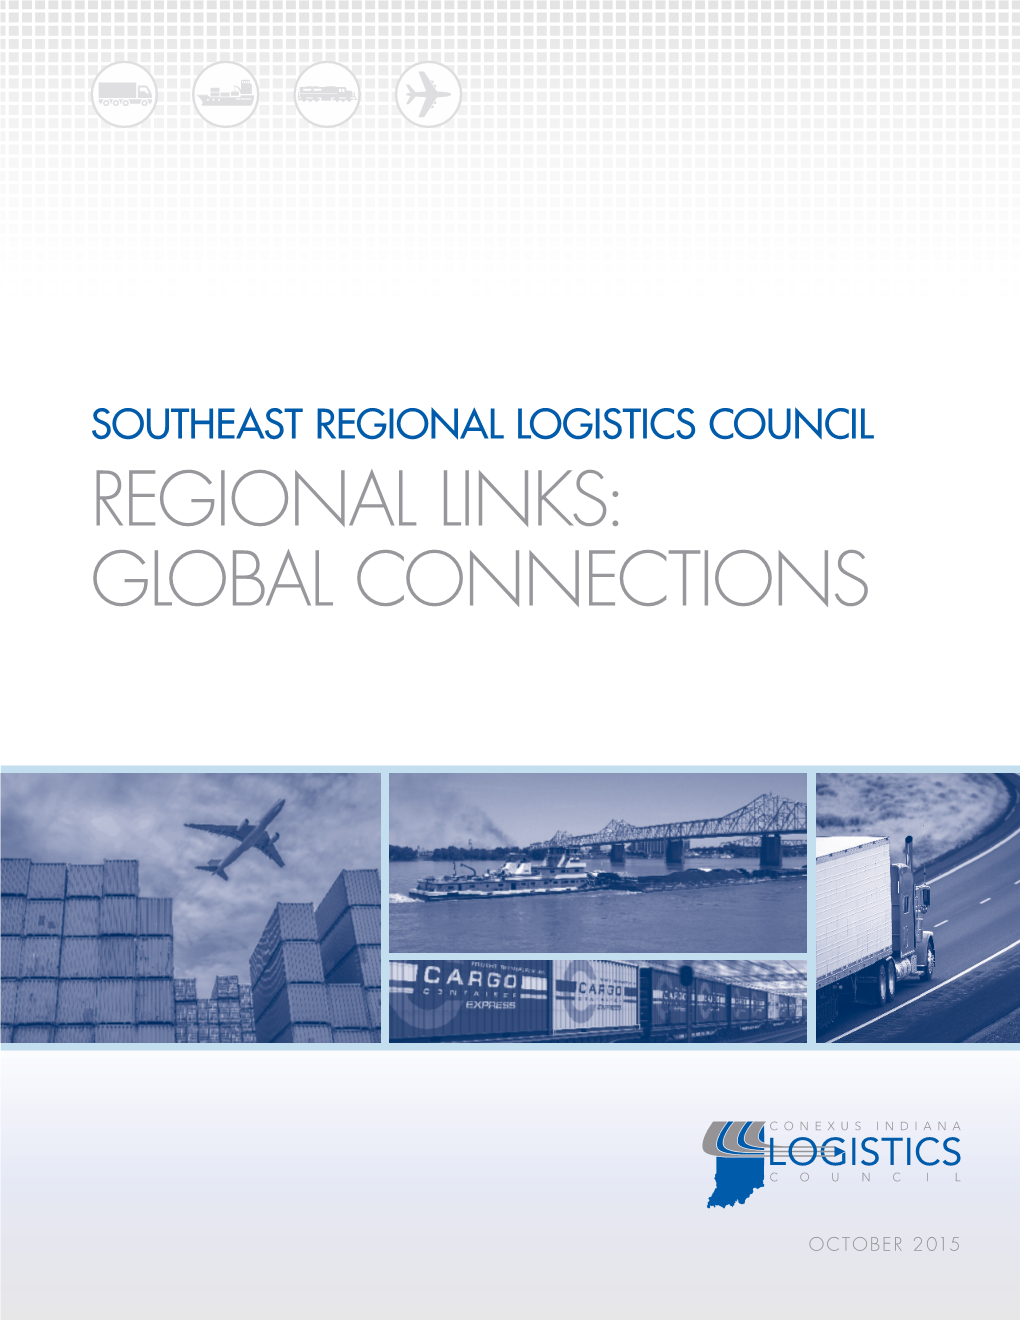 Regional Links: Global Connections